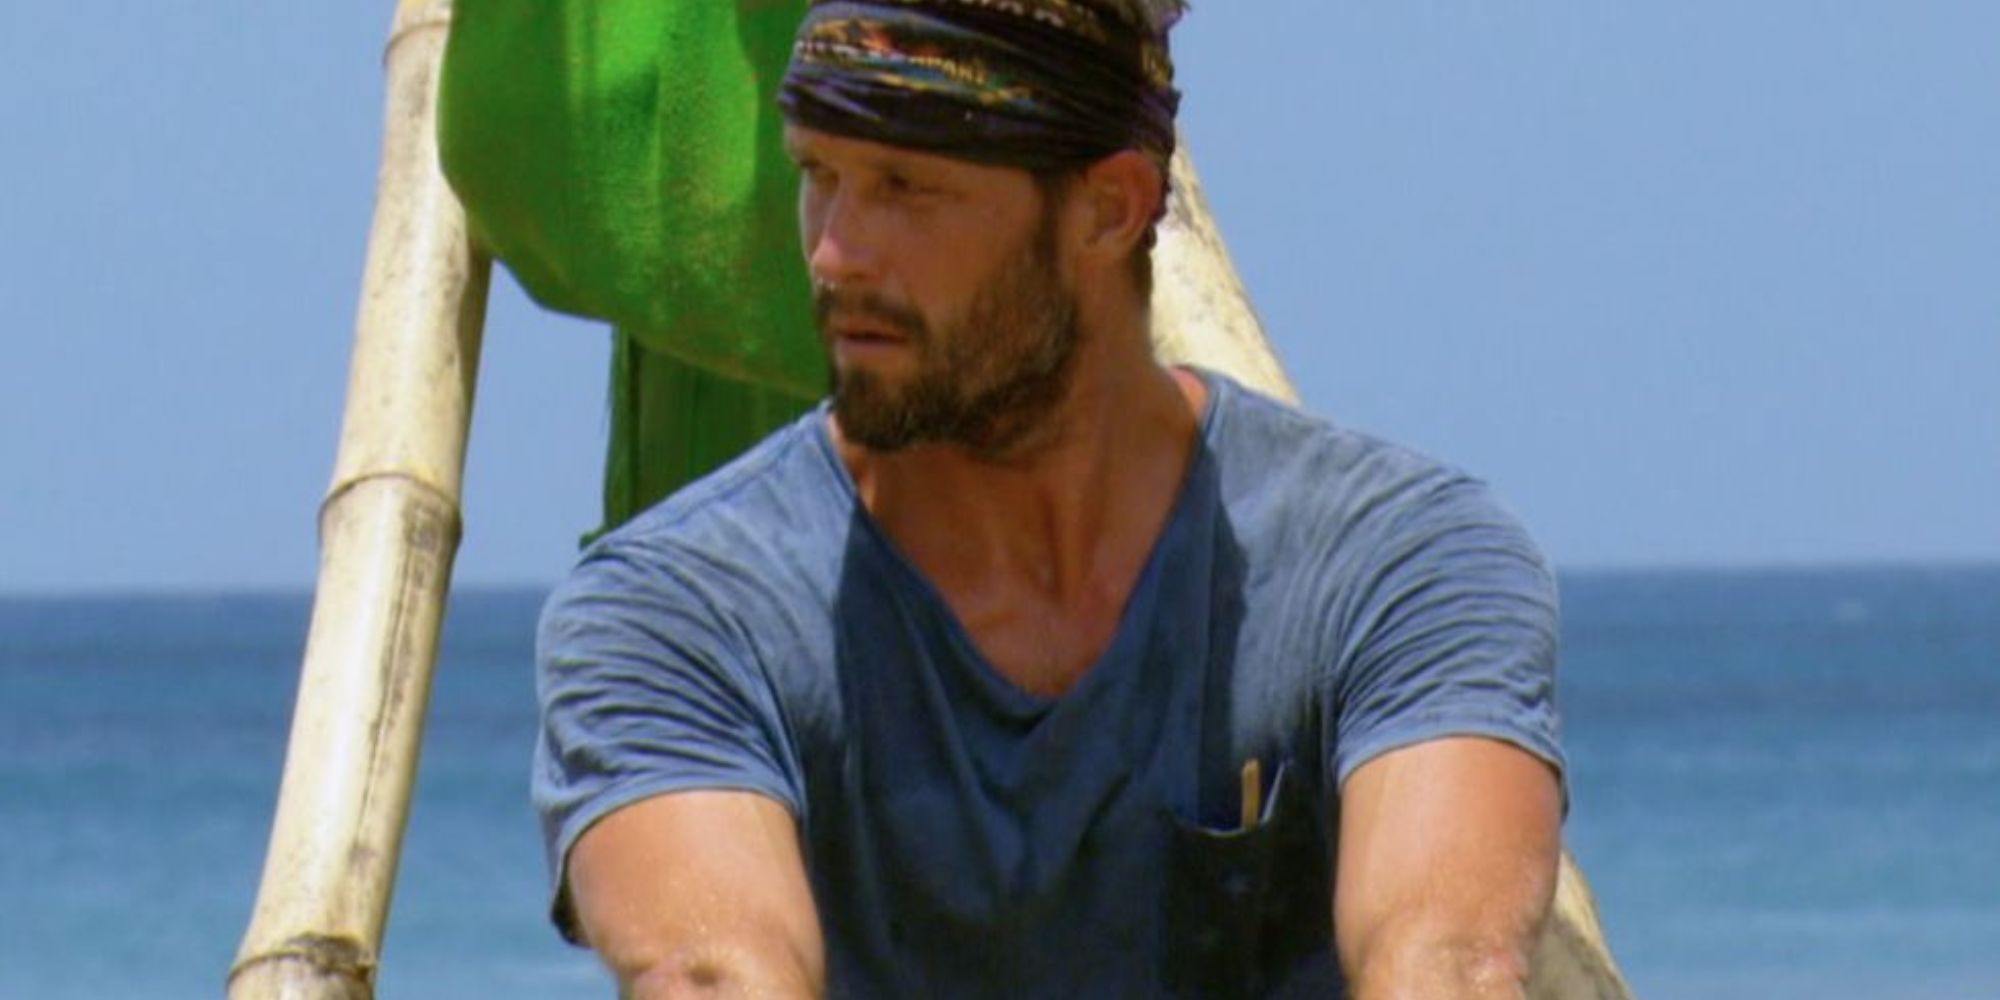 Survivor 30: Worlds Apart Mike Holloway in a blue shirt, ocean in the background